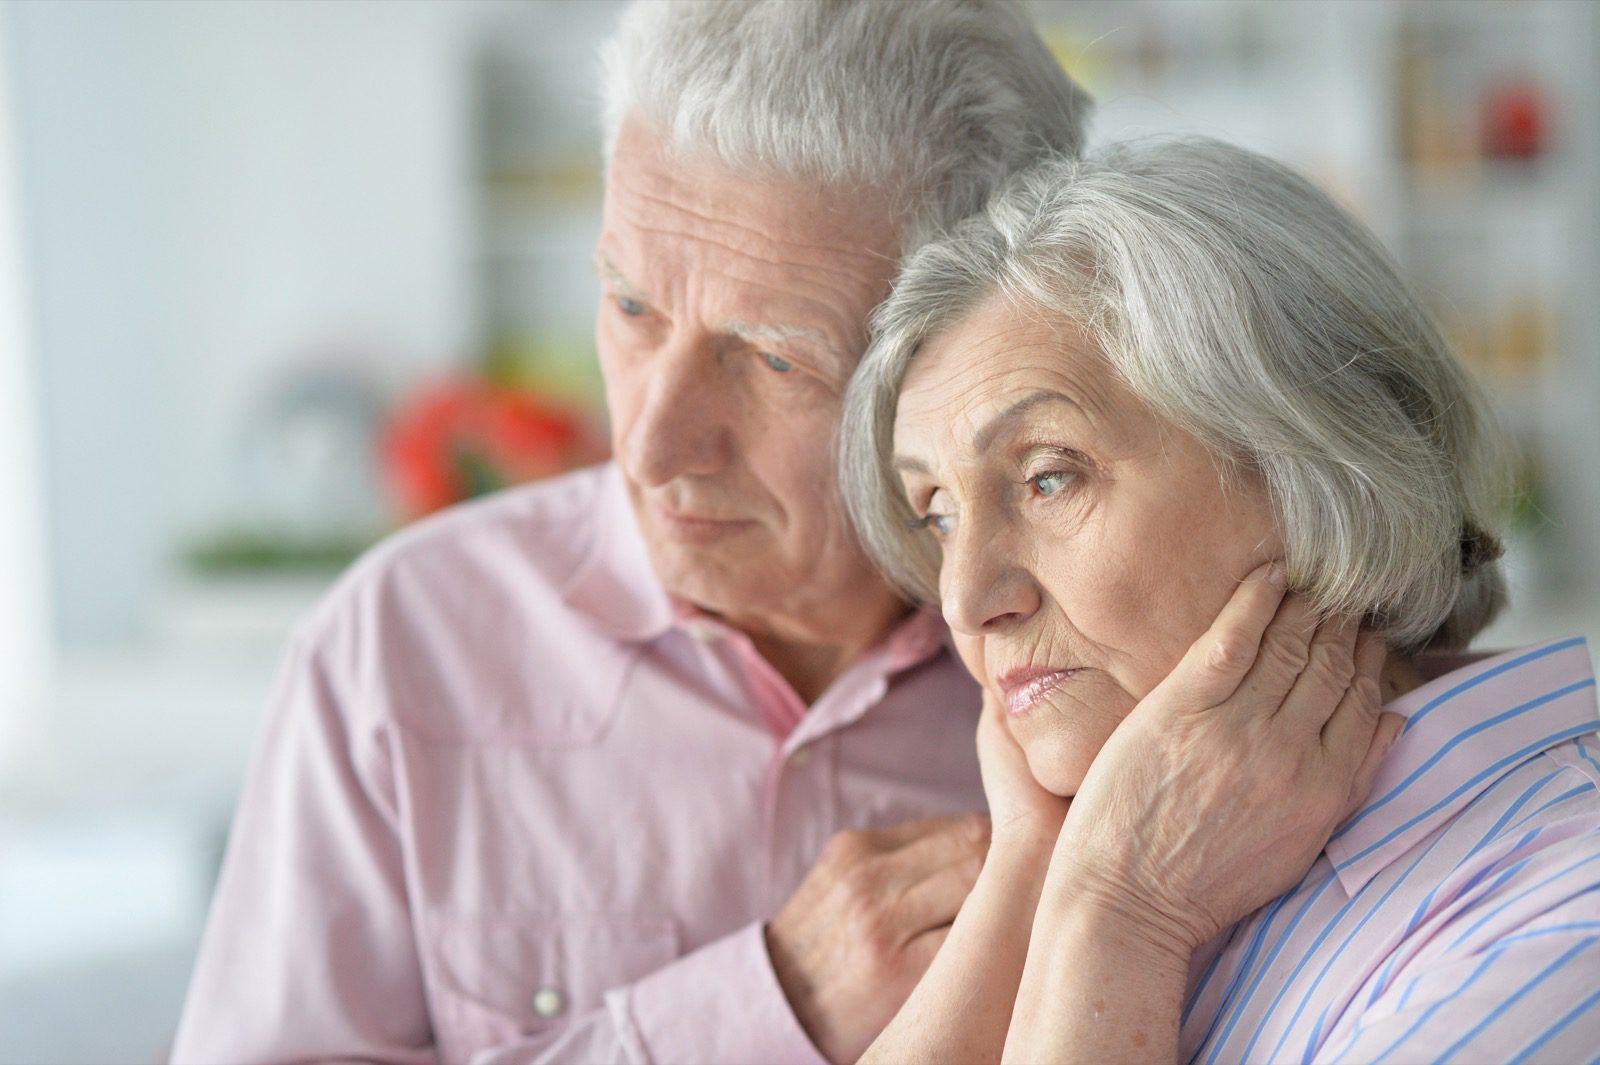 Is there really a bigger risk of dementia if you have untreated hearing loss?